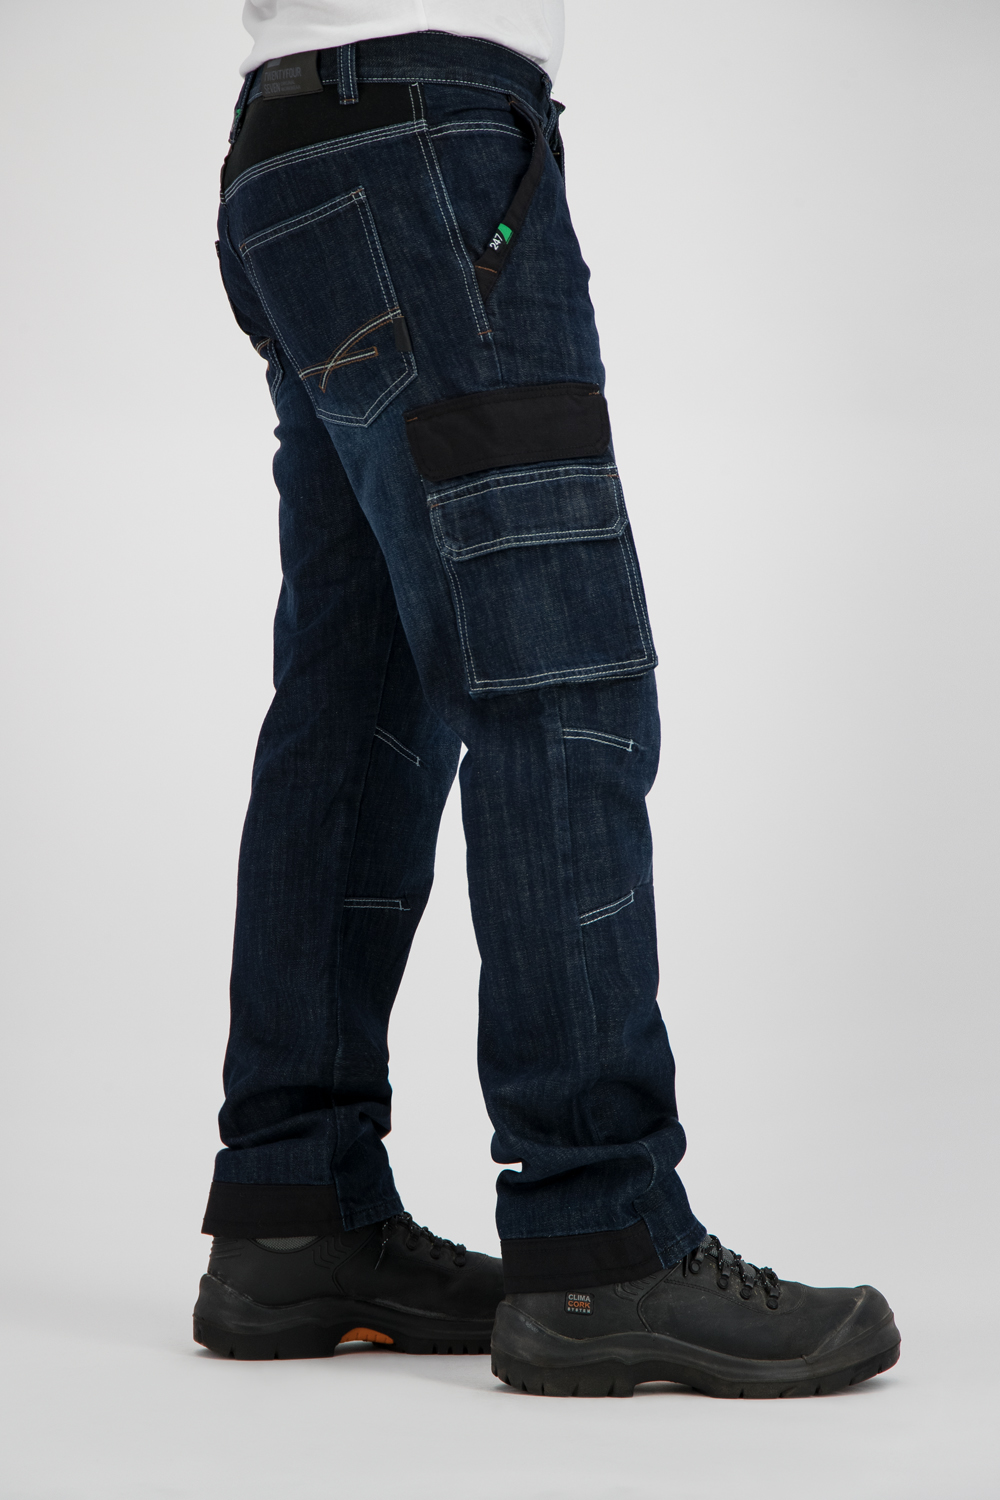 247 Jeans Grizzly D30 Dark blue